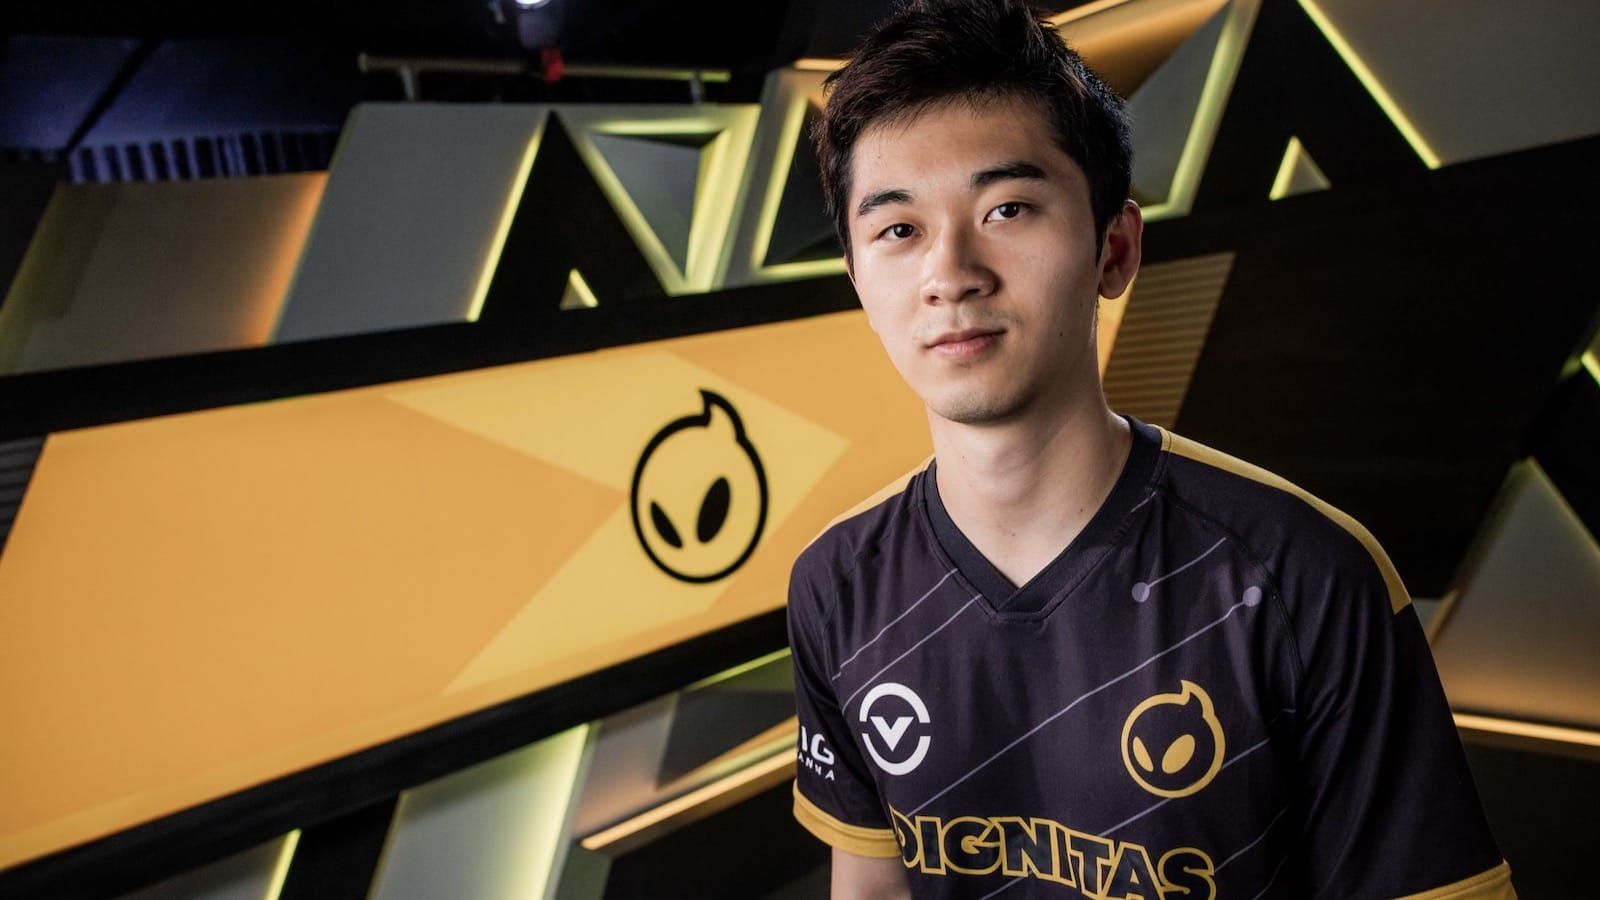 Close up of League of Legends player Biofrost in his black Dignitas jersey who faces the camera with a slight smile and the Gignitas logo behind him in yellow